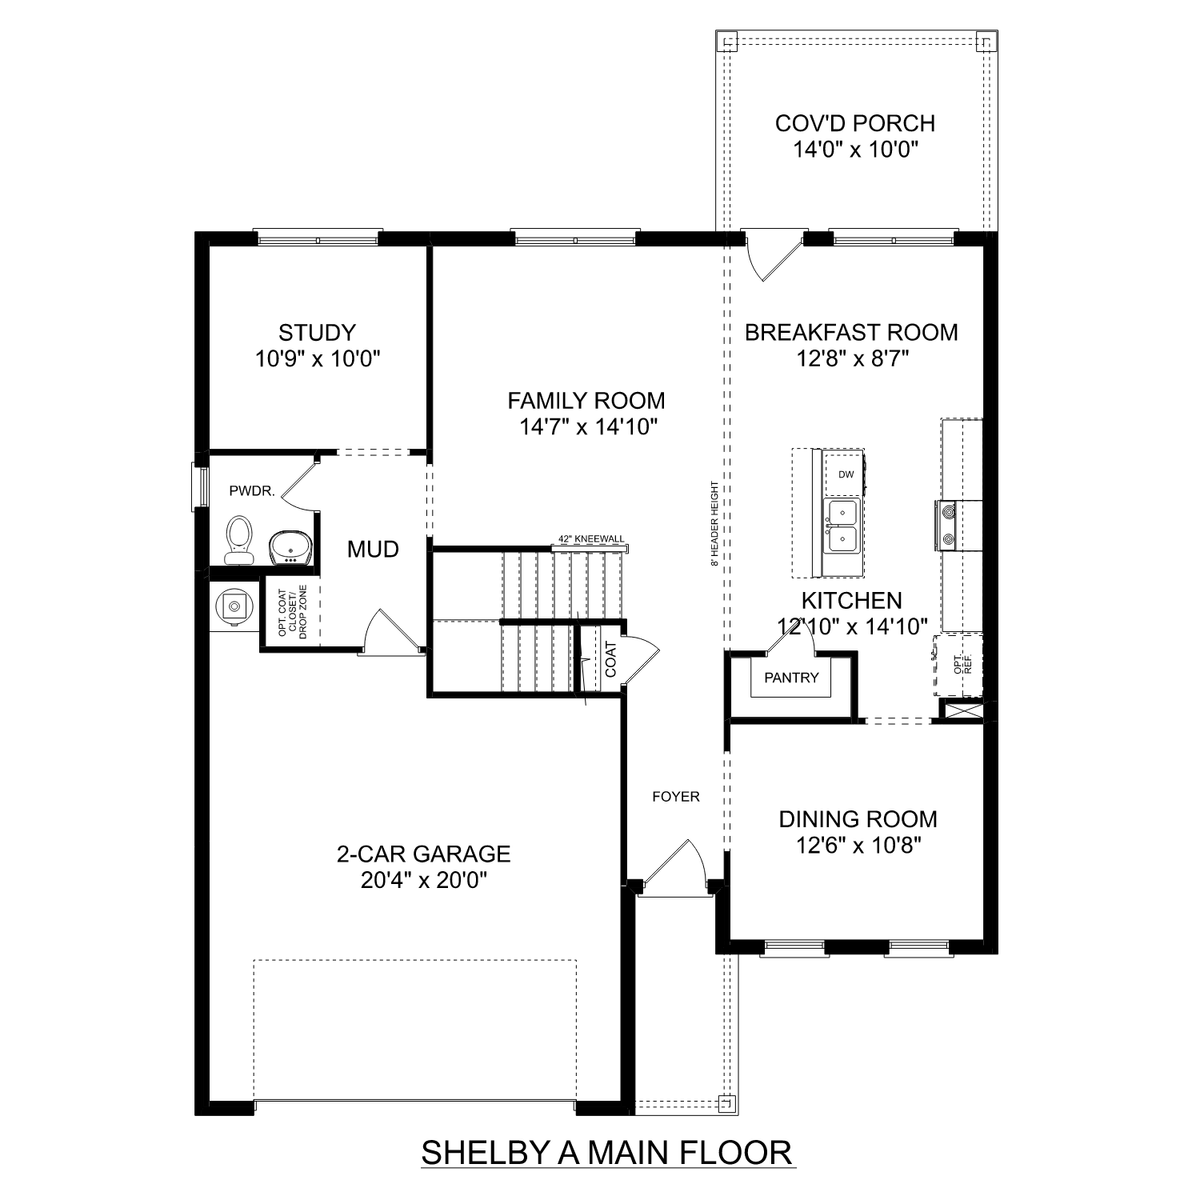 1 - The Shelby A buildable floor plan layout in Davidson Homes' Heritage Lakes community.